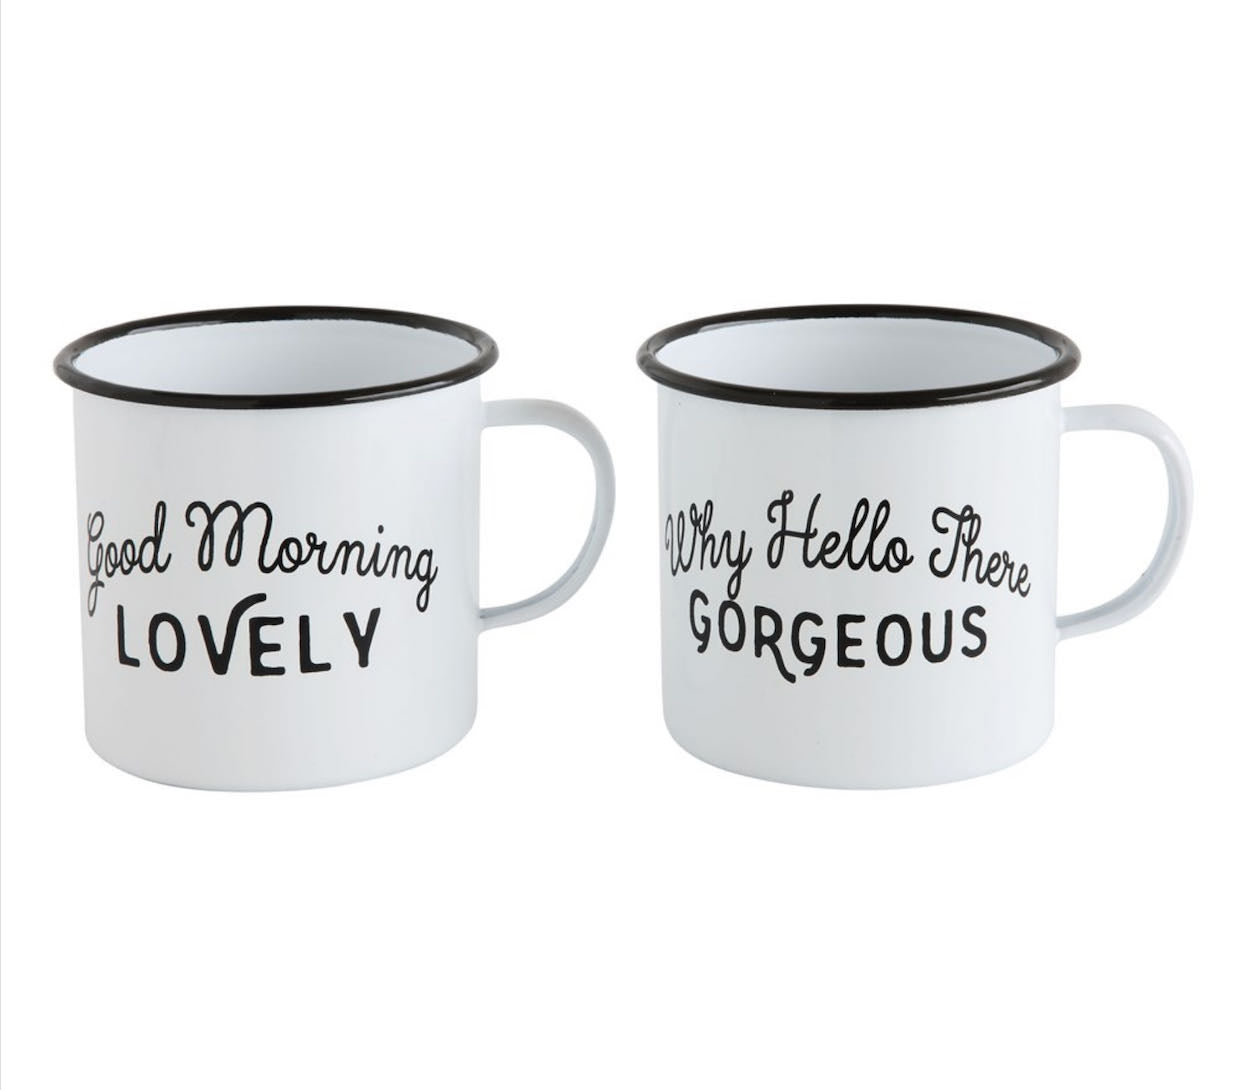 Pair of Lovely & Gorgeous 20 oz Enamelware Mugs - A